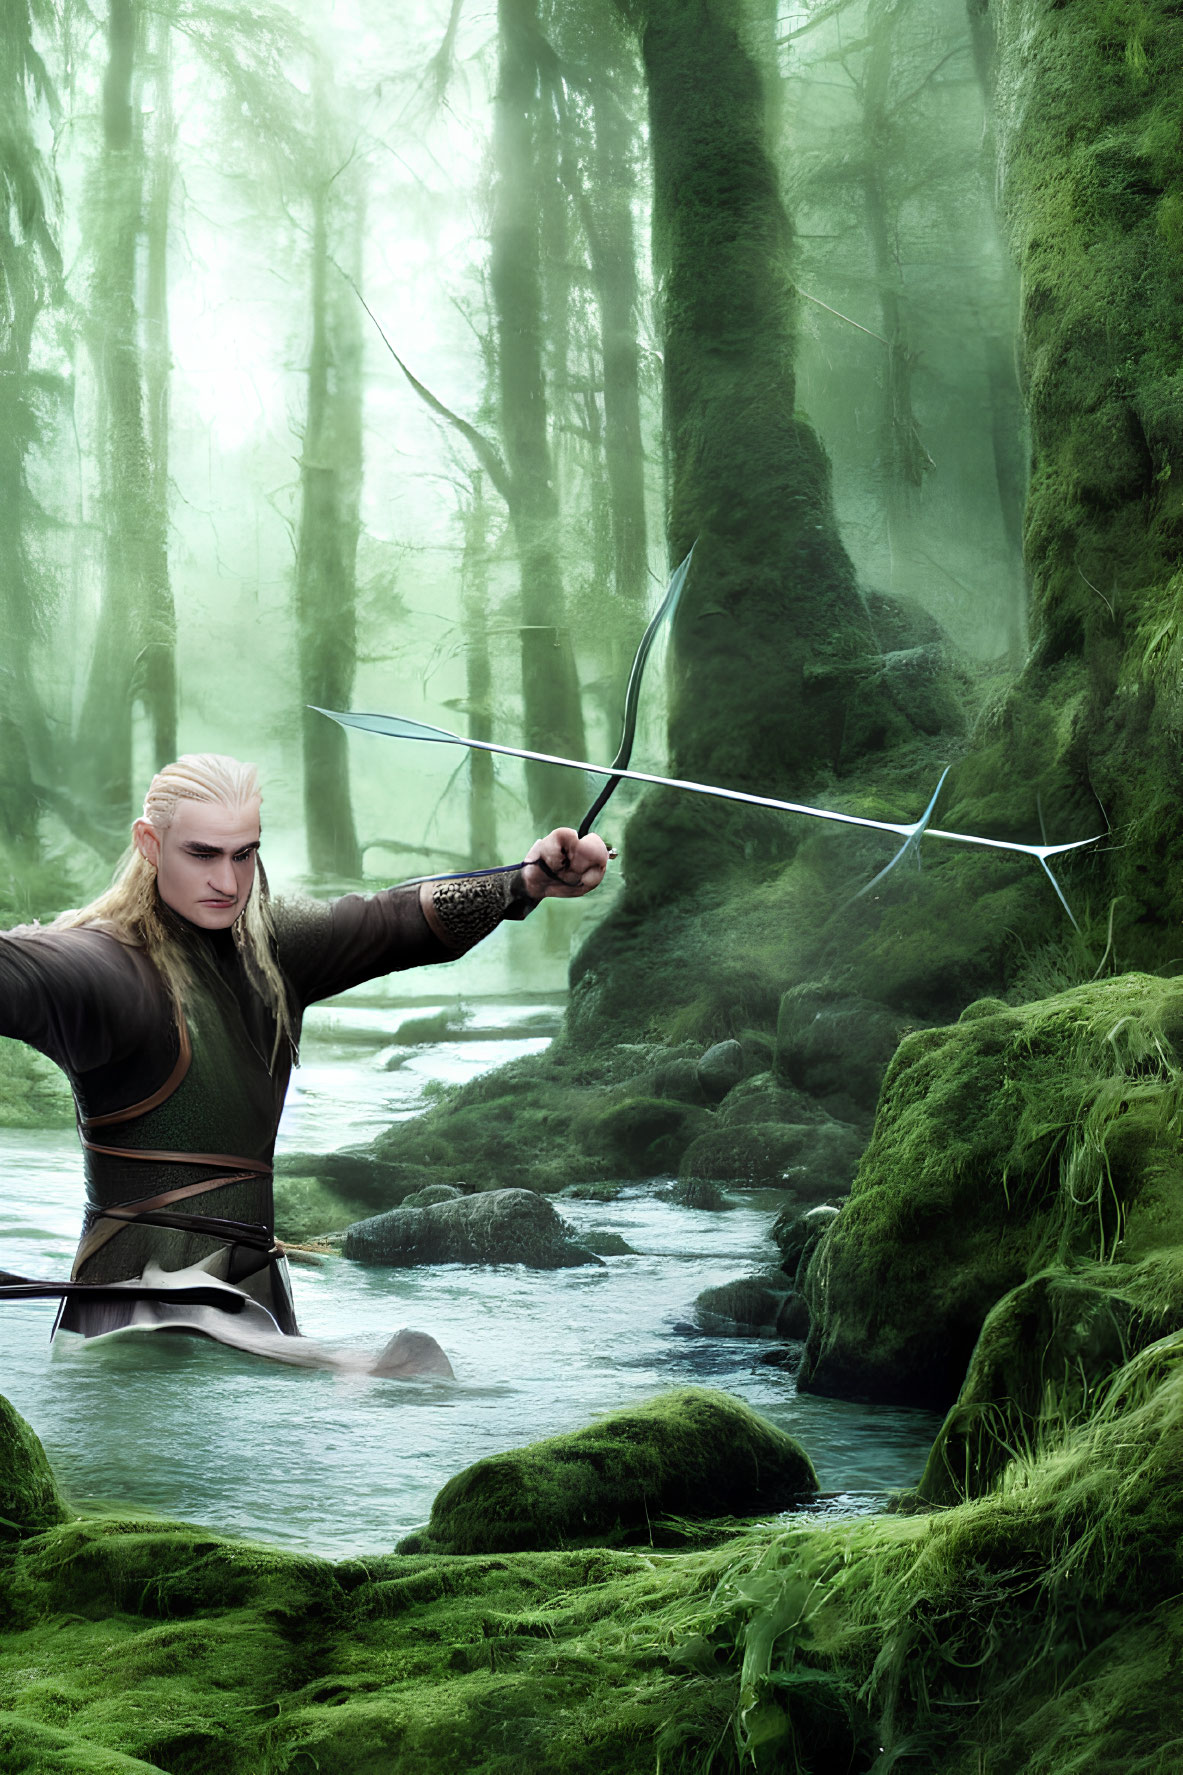 Blond elf with bow and arrow in misty green forest